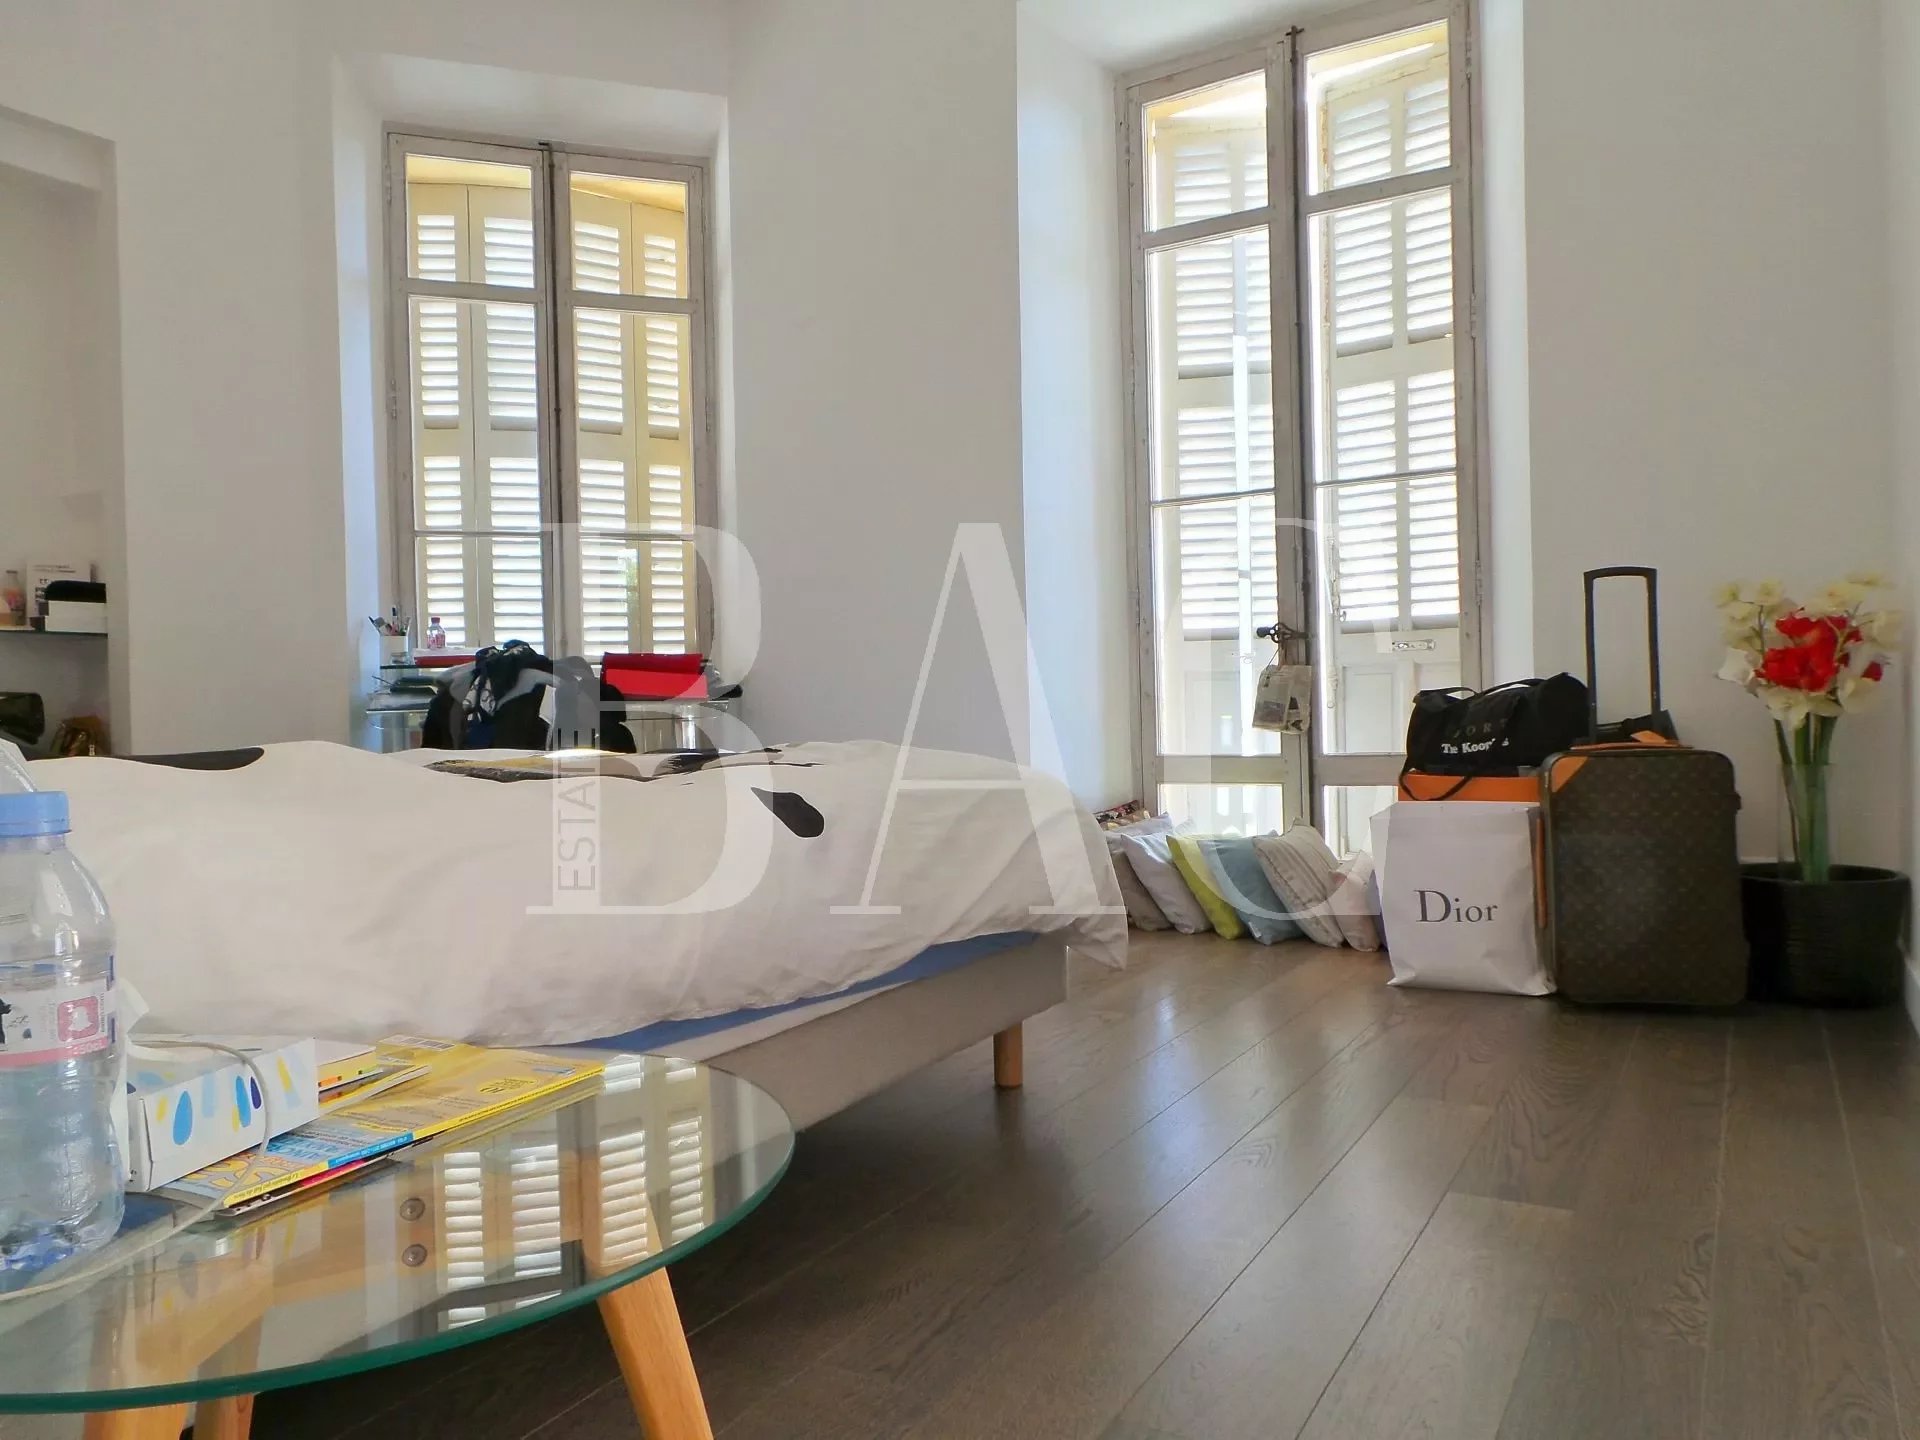 Cannes, 400 meters from the beach and 1000 meters from Forville market